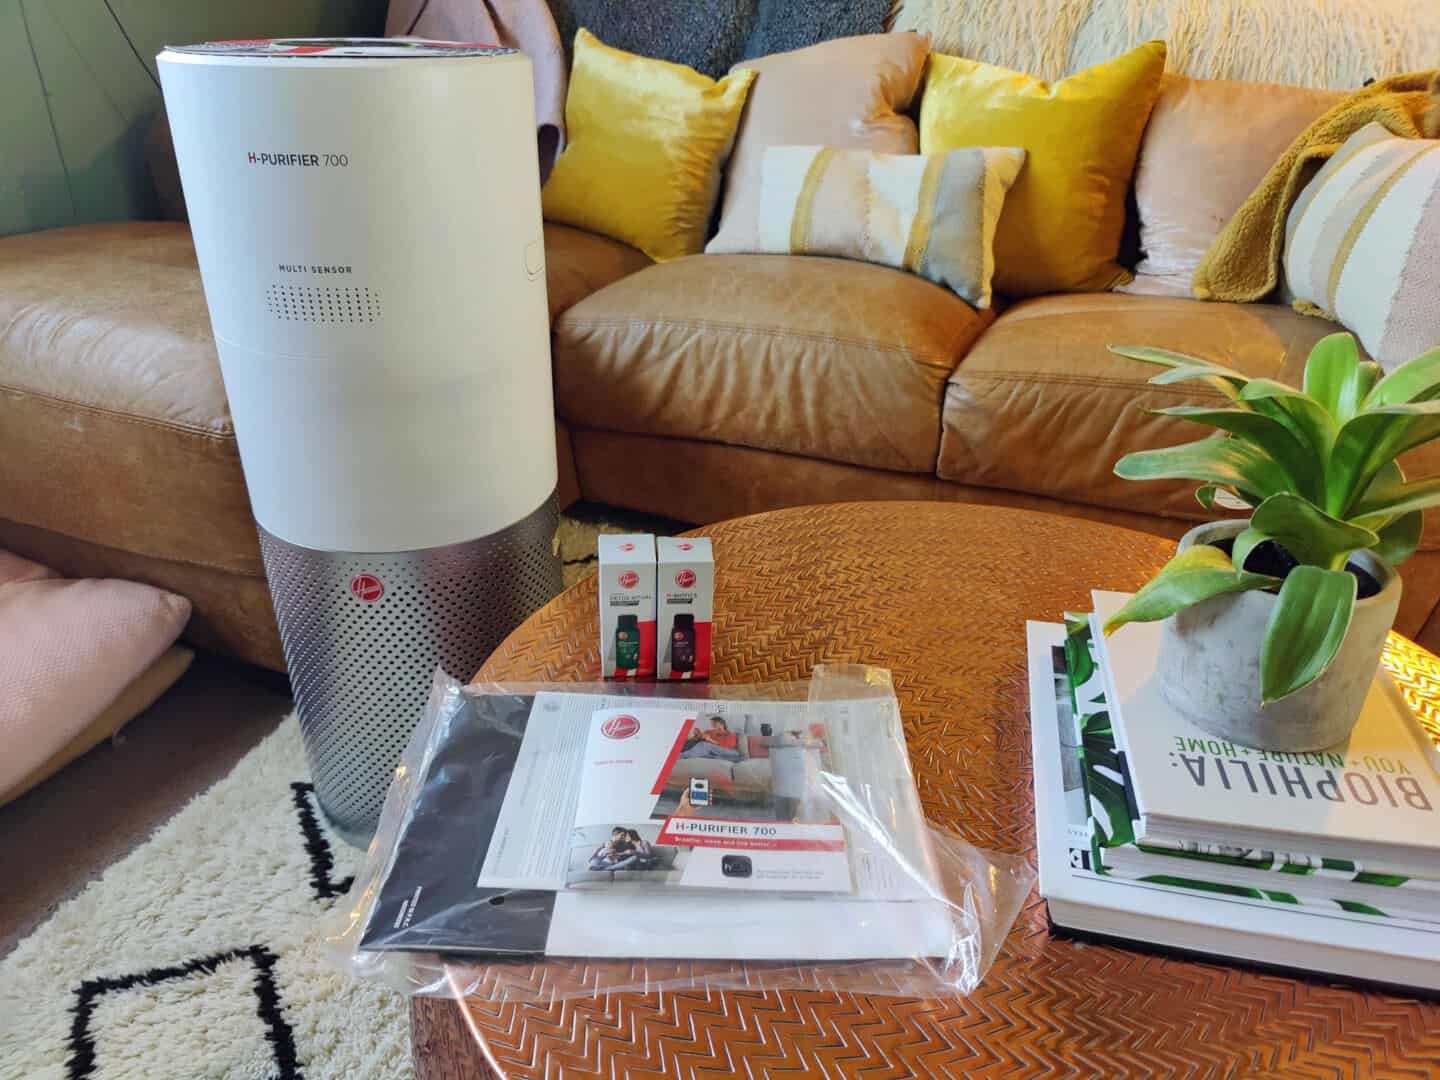 The Hoover Air Purifier 700 stands in a living room in front of a sofa and beside a coffee table. On the coffee table is the user manual, a pile of books and a plant.